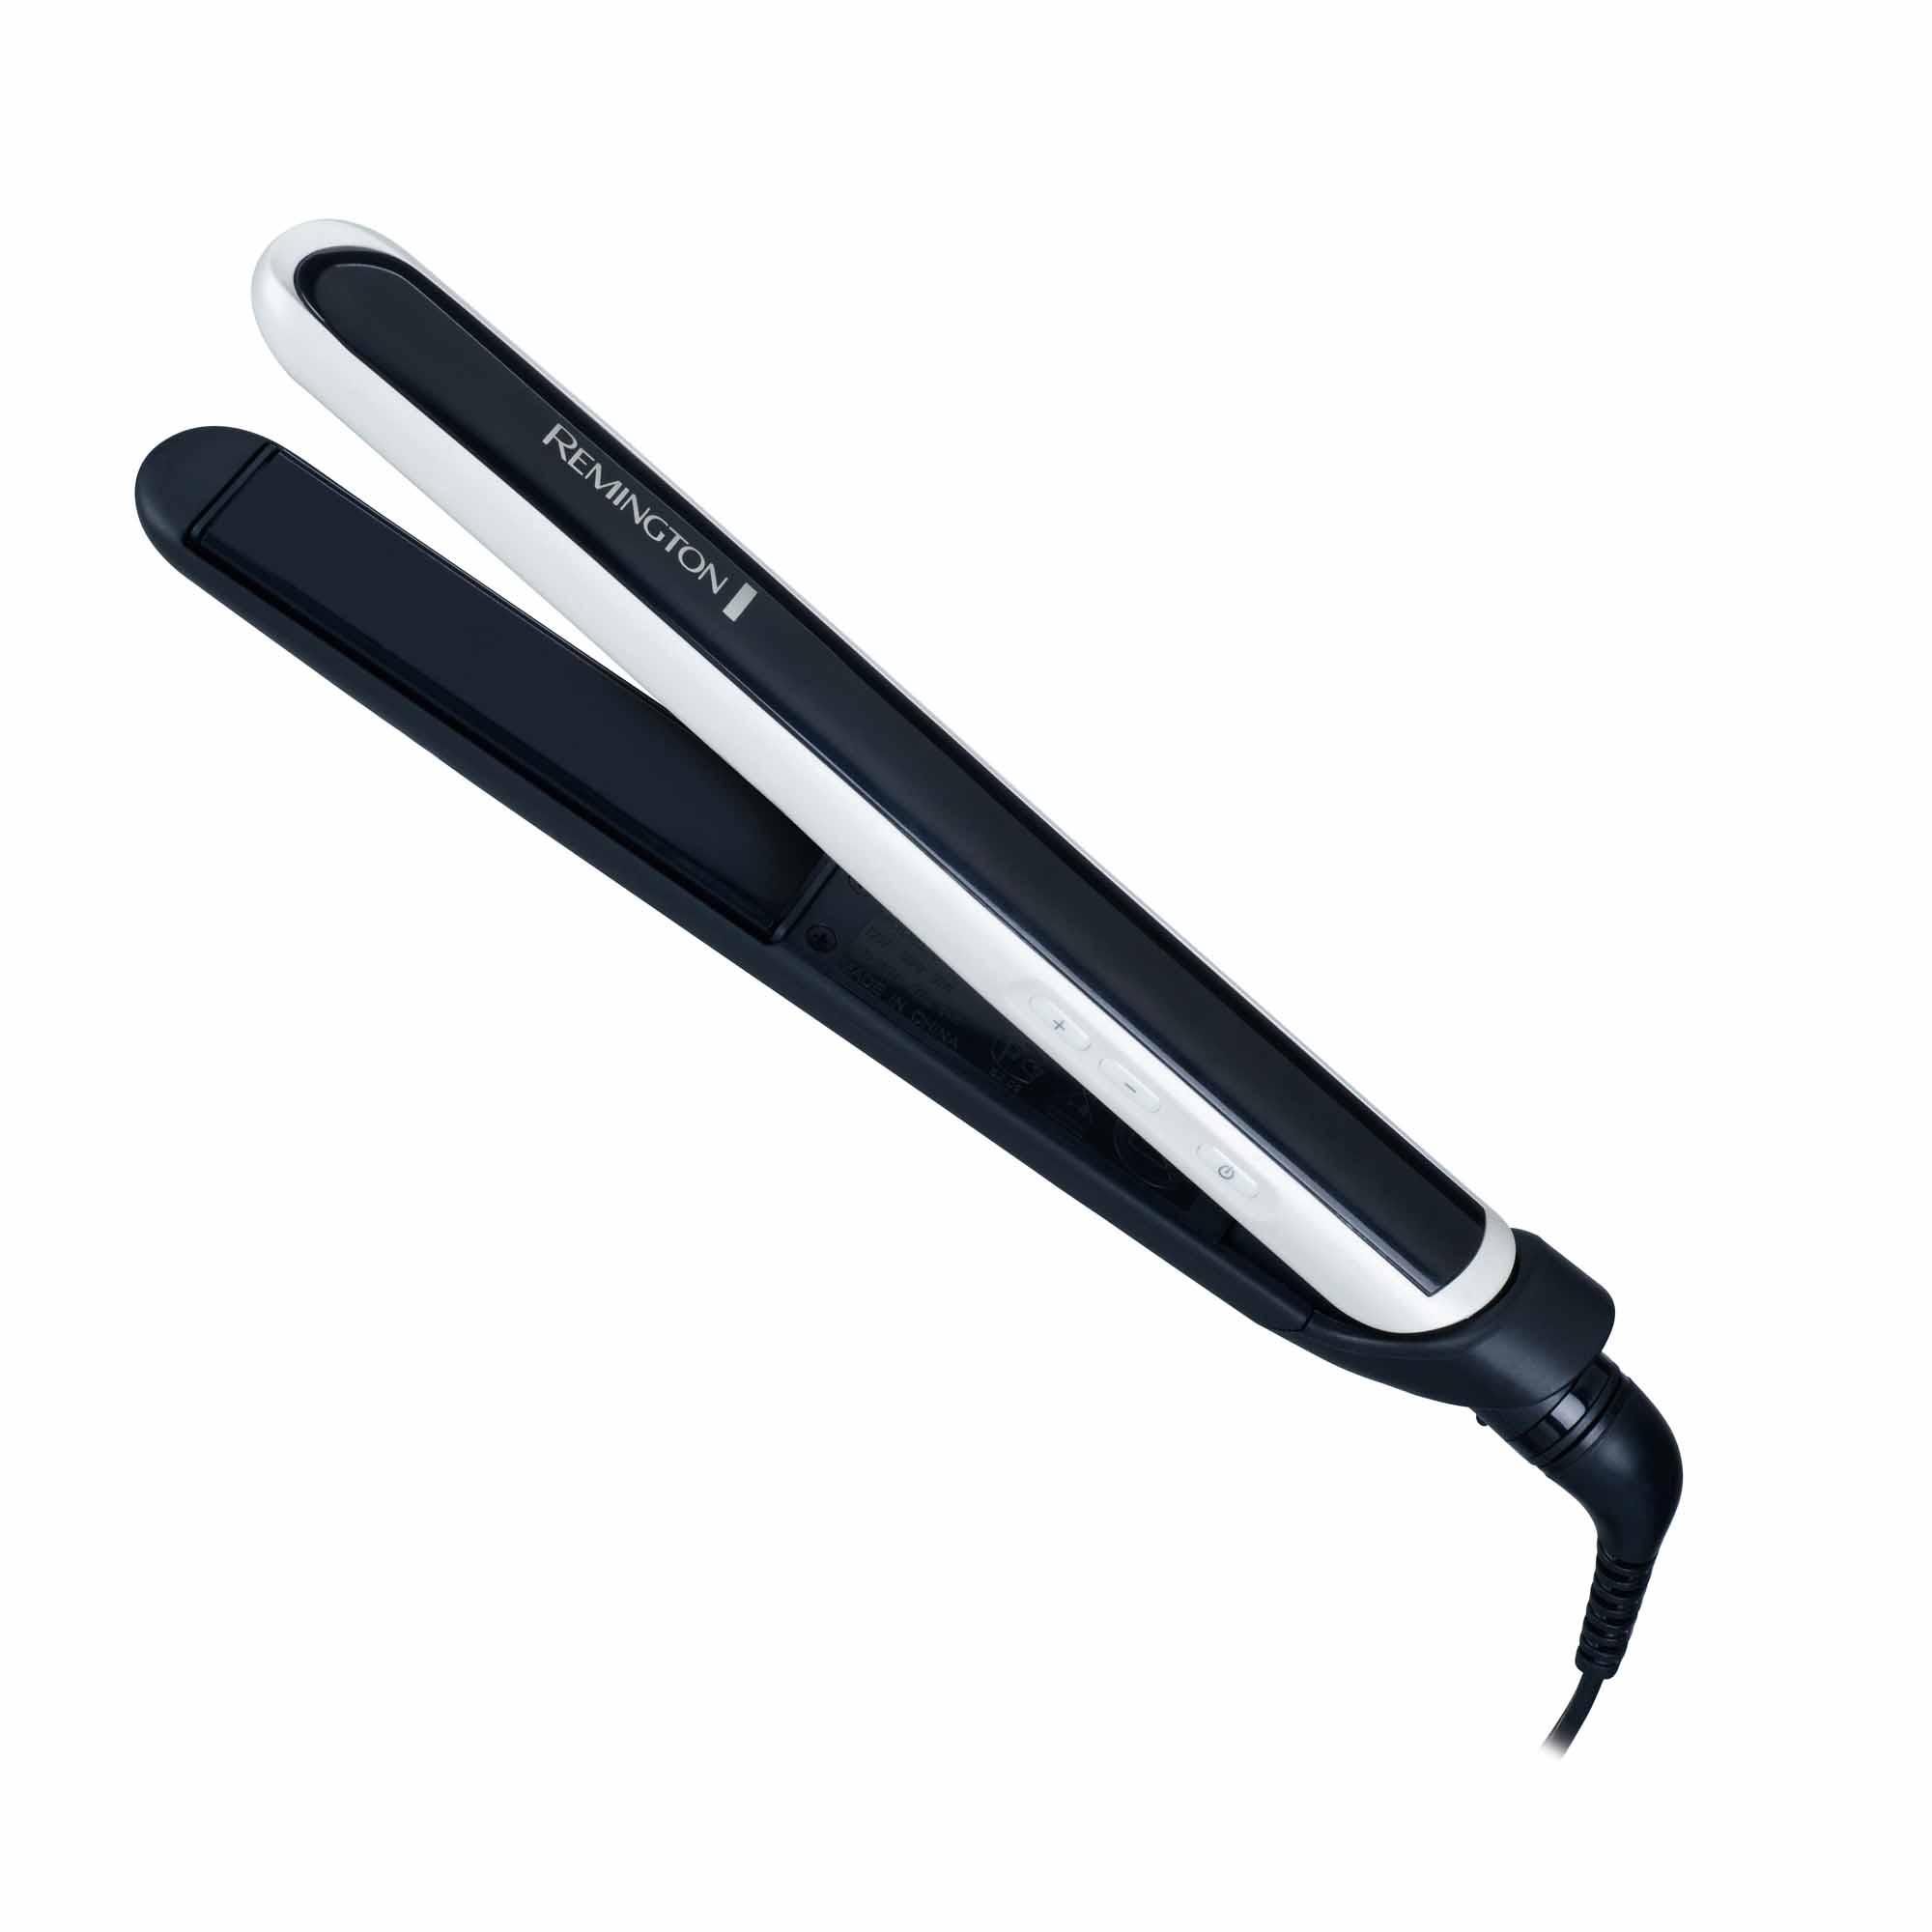 Remington 1" Flat Iron with Pearl Ceramic Technology, Black, S9500PP - image 1 of 3